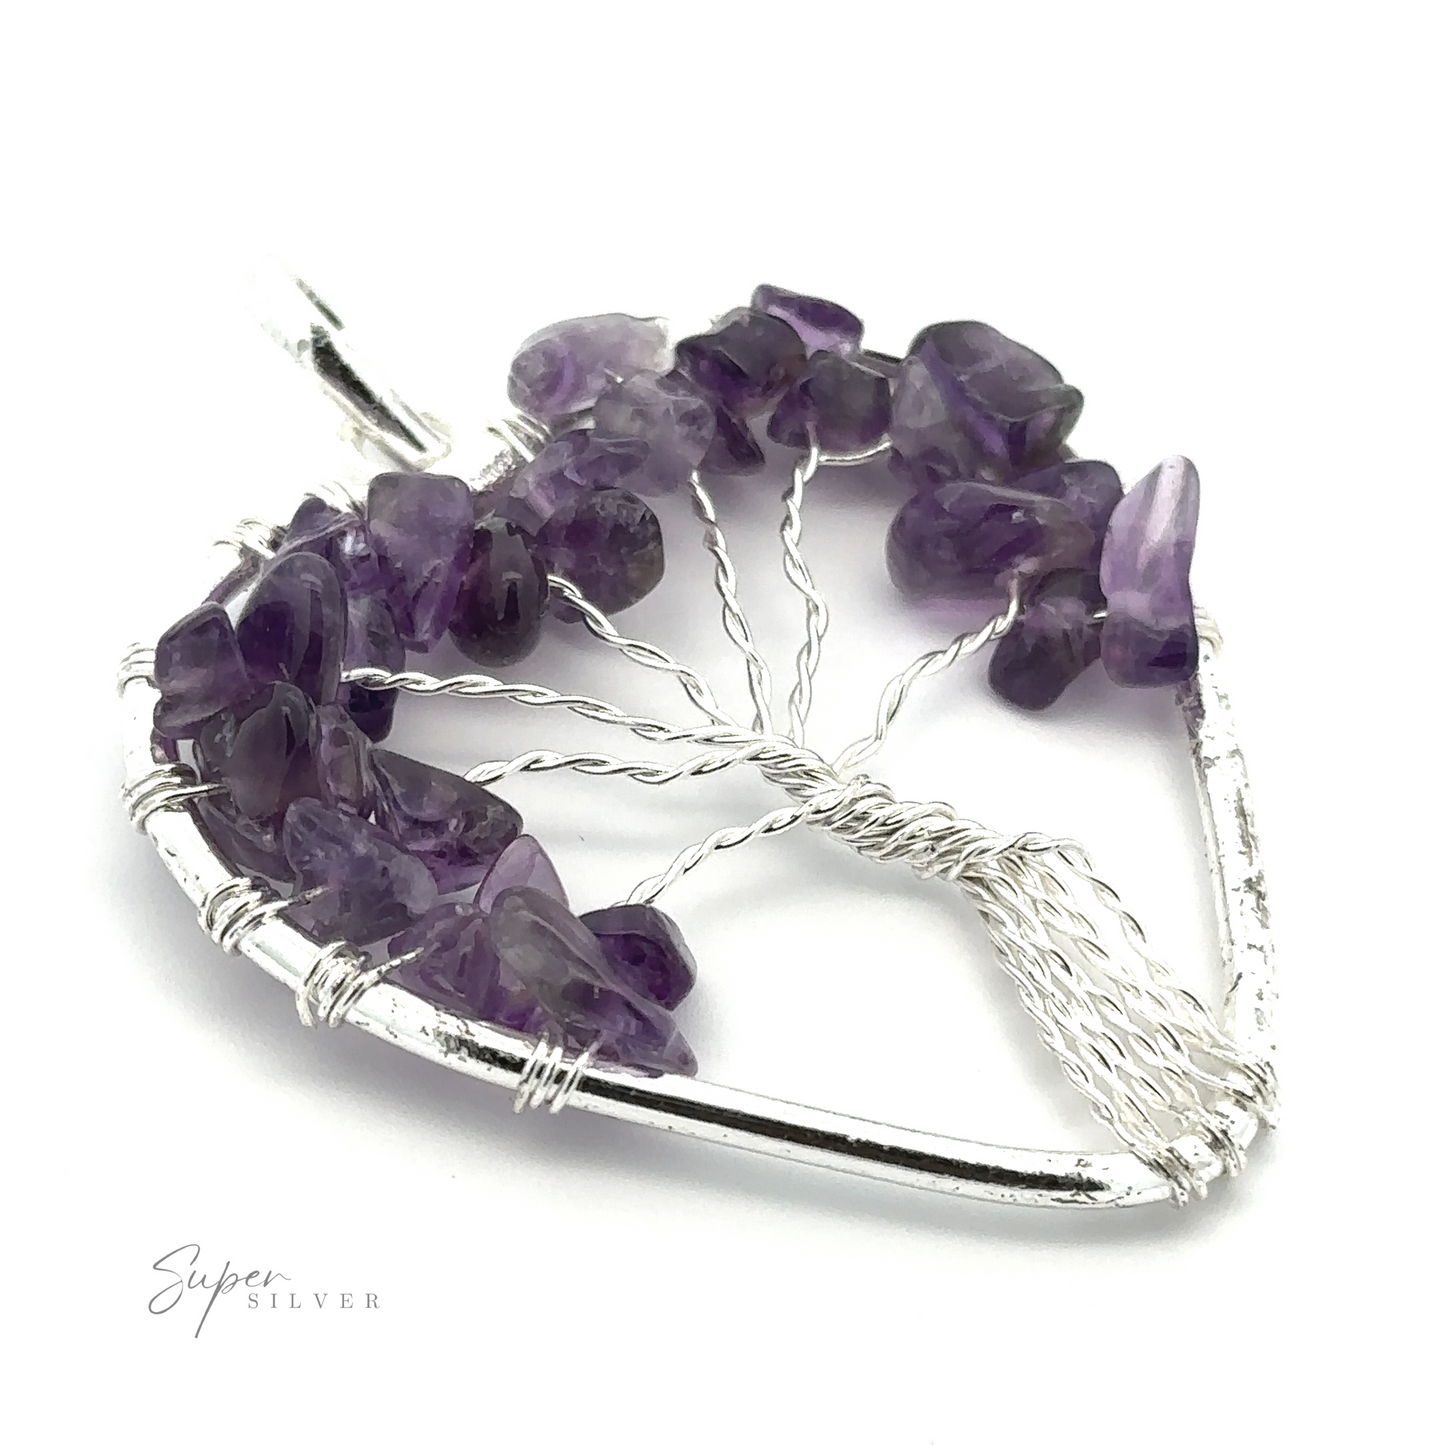 
                  
                    A Heart Shaped Tree of Life Pendant, adorned with small amethyst stones, displayed against a white background. The brand name "Super Silver" is visible in the bottom left corner.
                  
                